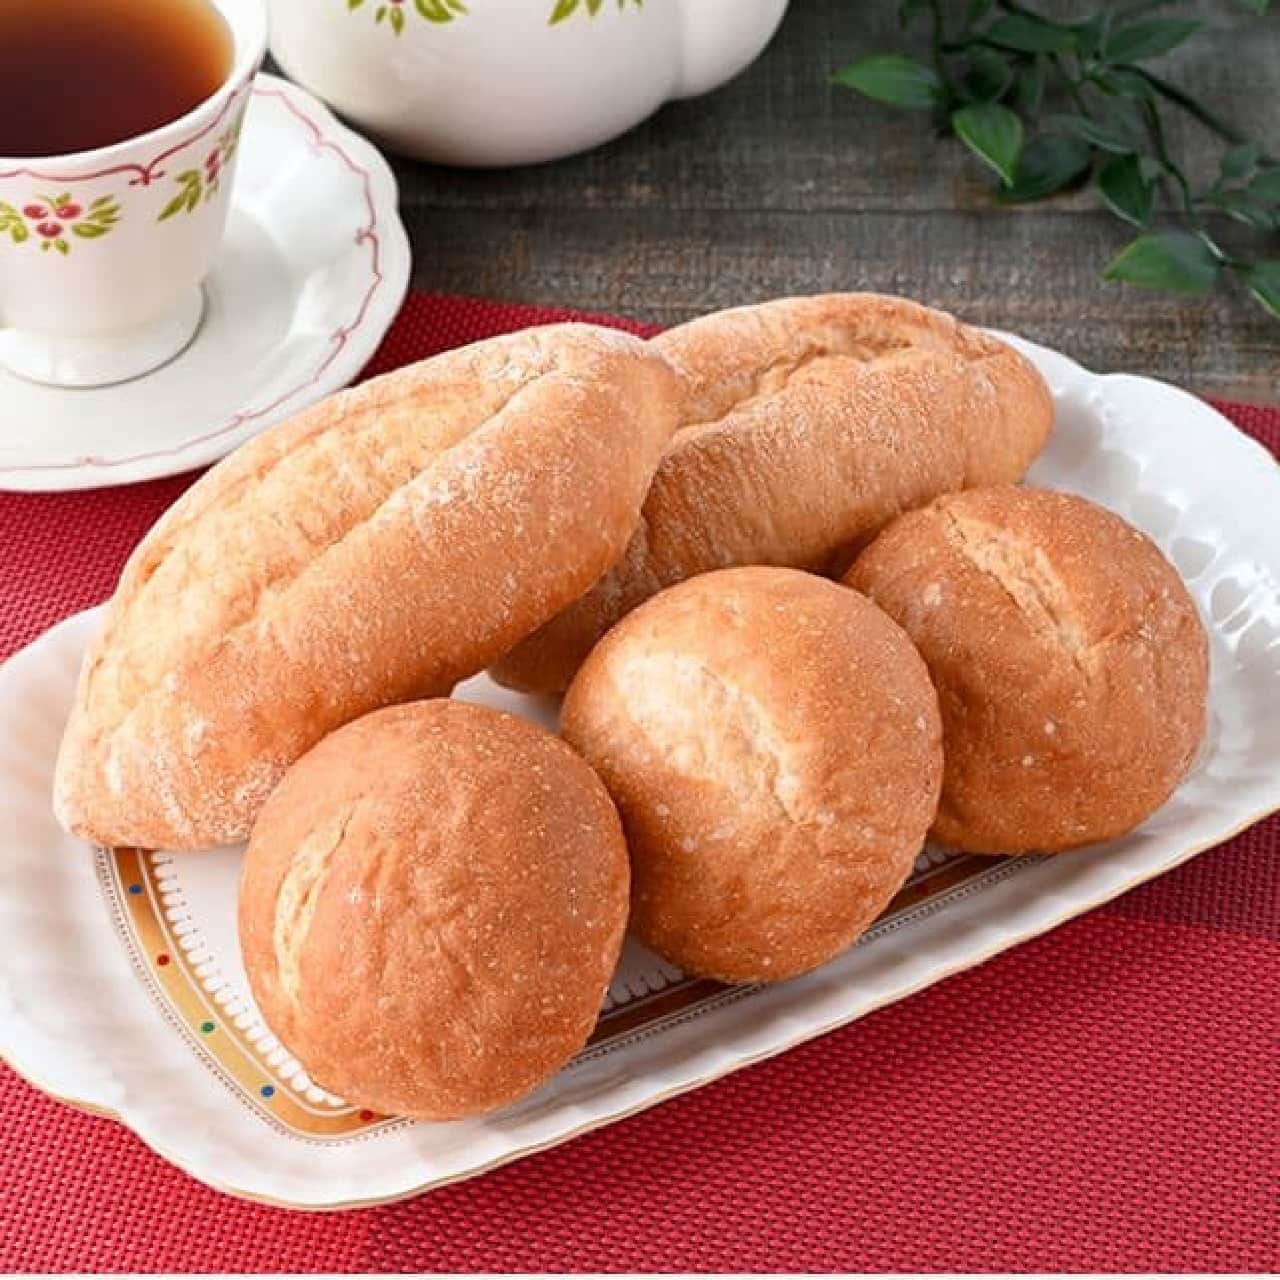 FamilyMart "Bread with Whole Wheat Flour and 5 pieces of Balled French Bread"